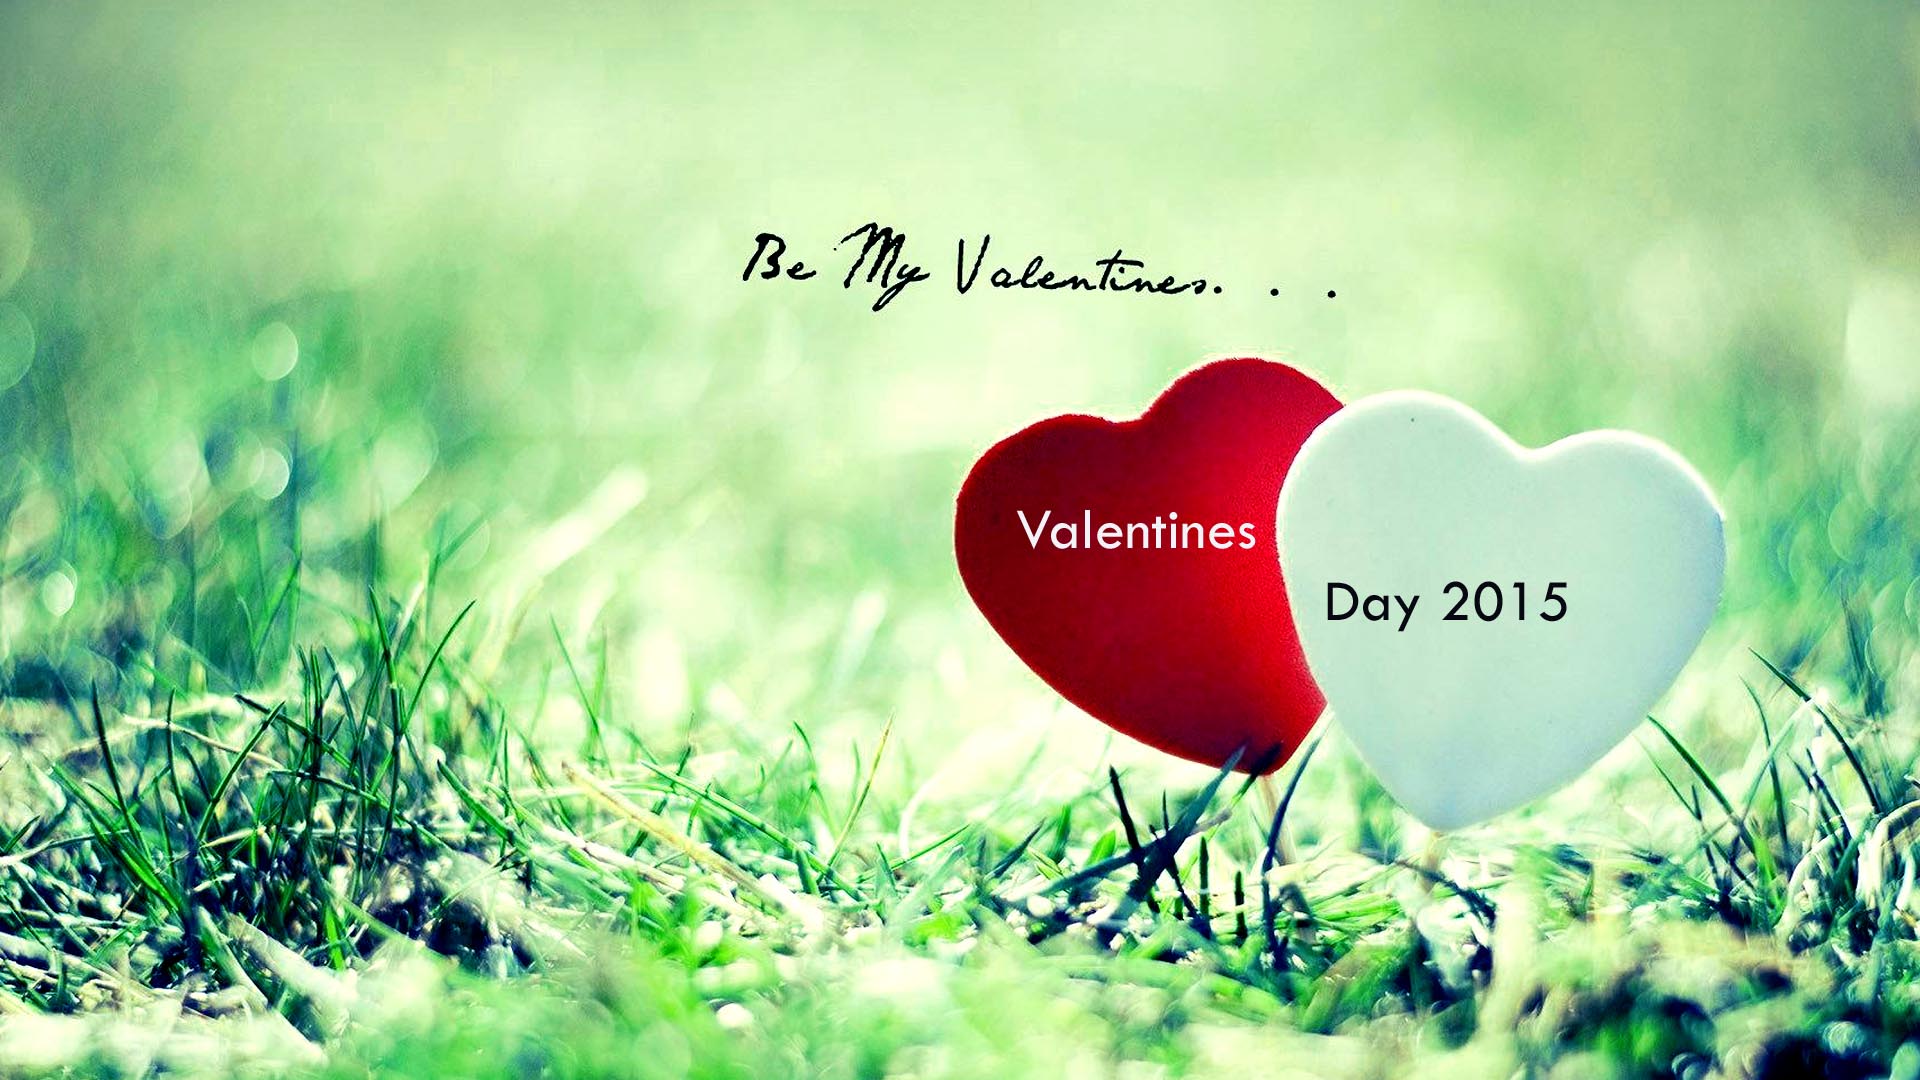 Valentines Day 2015 wallpaper for her, Free Choice Wallpaper